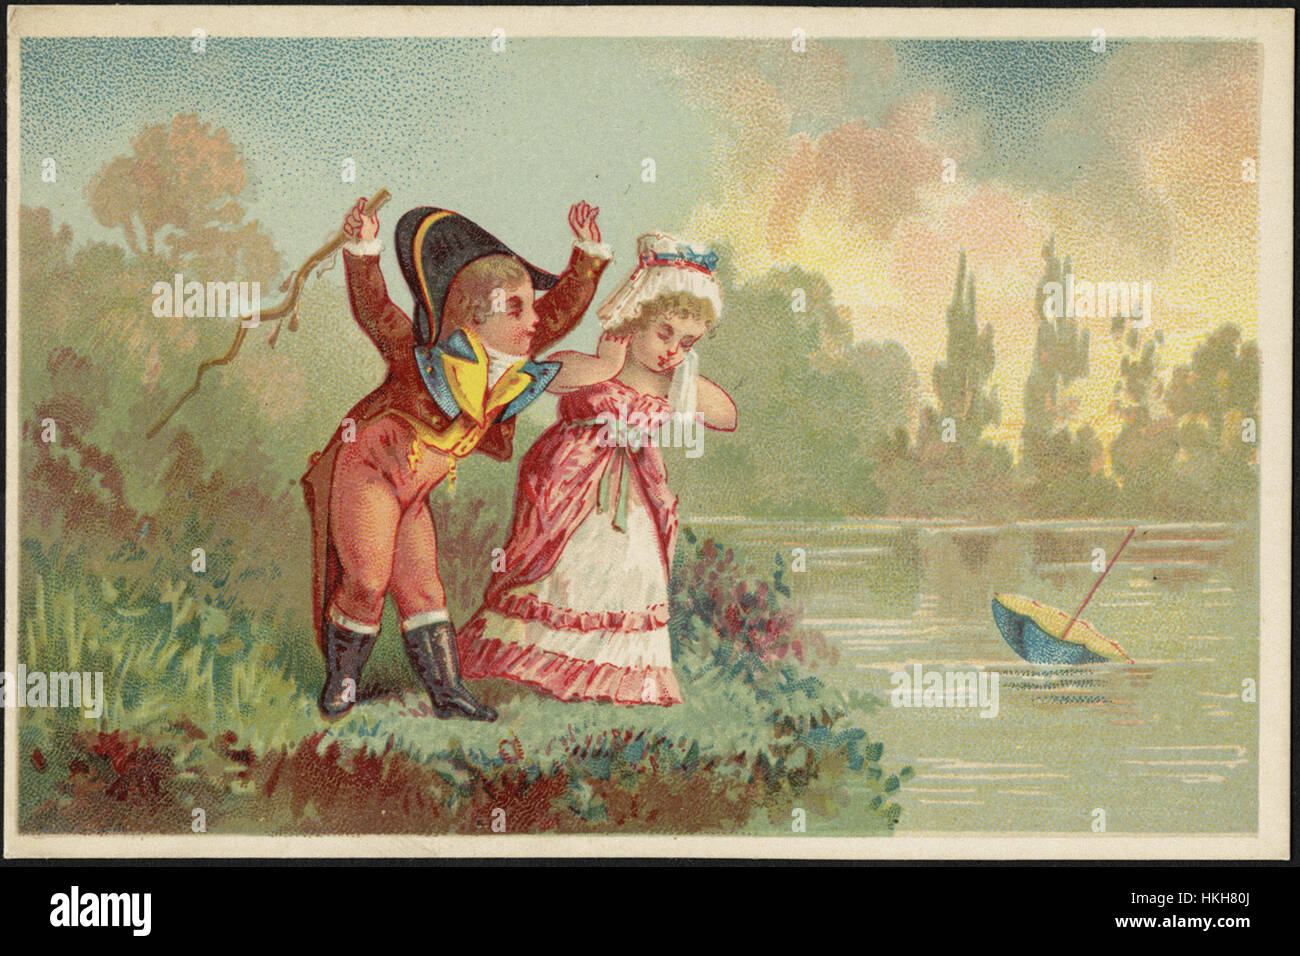 Boy and girl in historical costume at the water's edge, looking at the umbrella that has floated away. Stock Photo